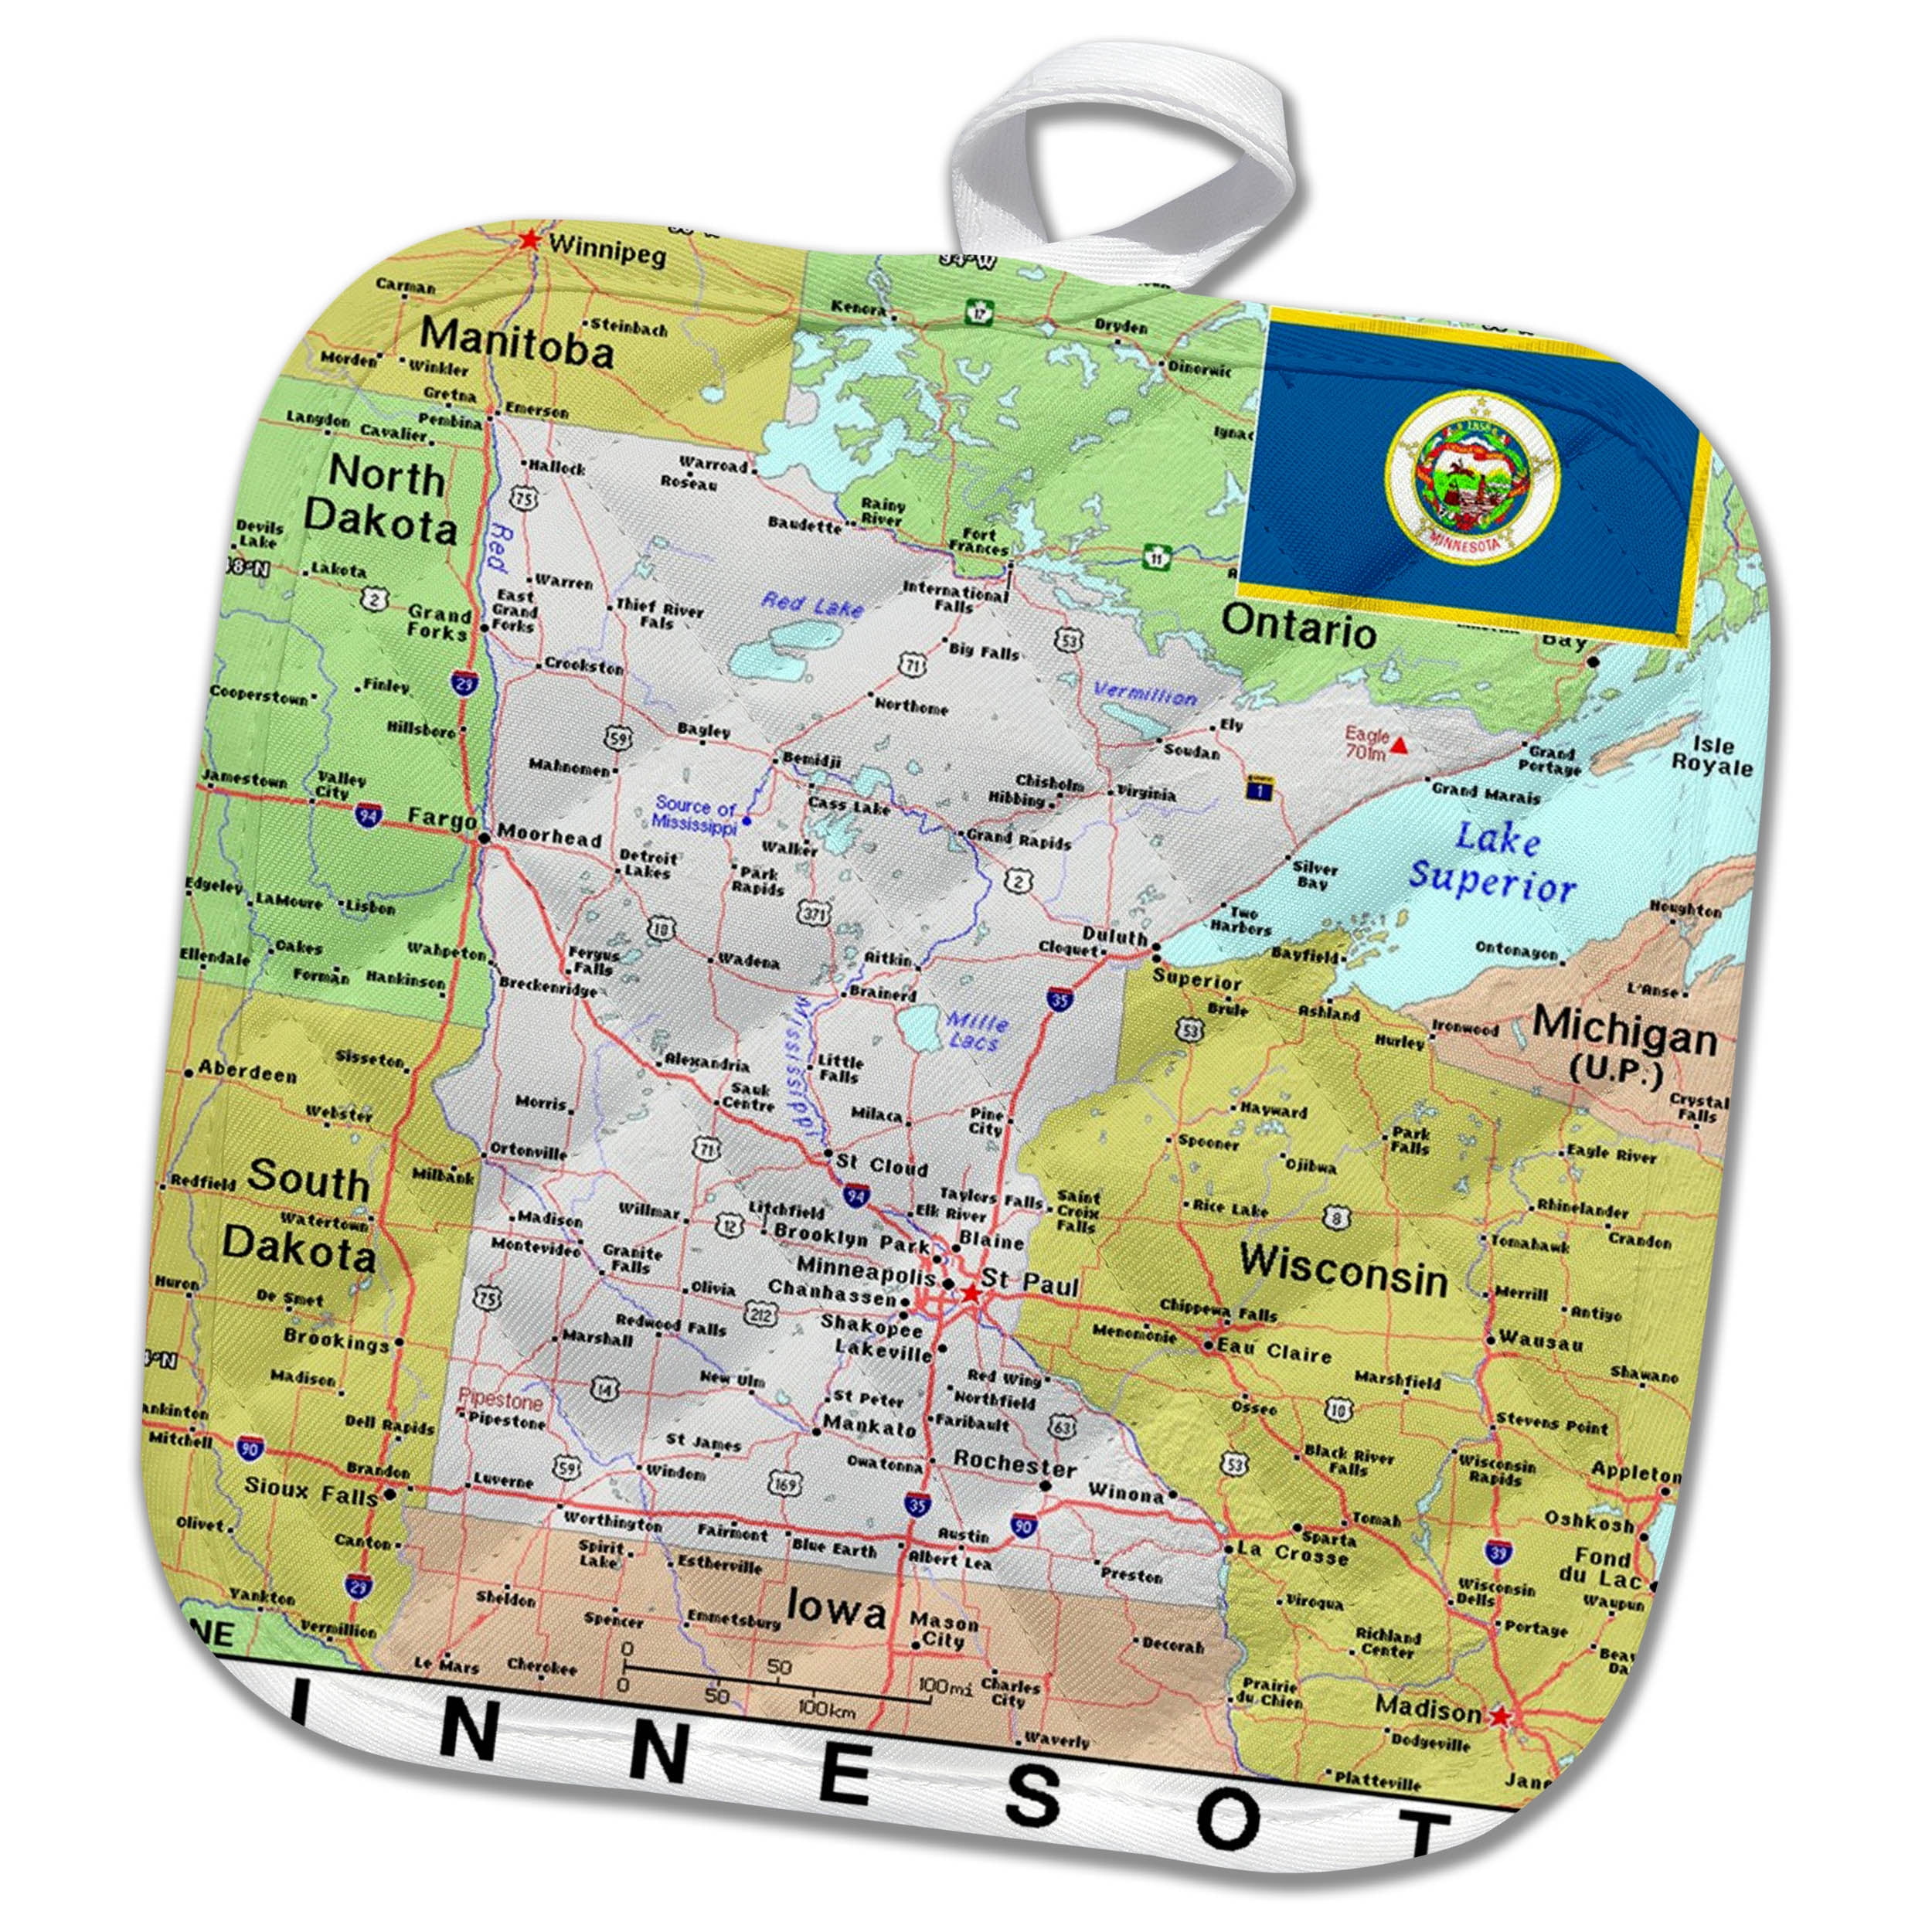 PHL_291402_1 Image of Topographic Map of Illinois n State Flag Topo Maps Flags of States 8x8 Potholder 3dRose Lens Art by Florene 